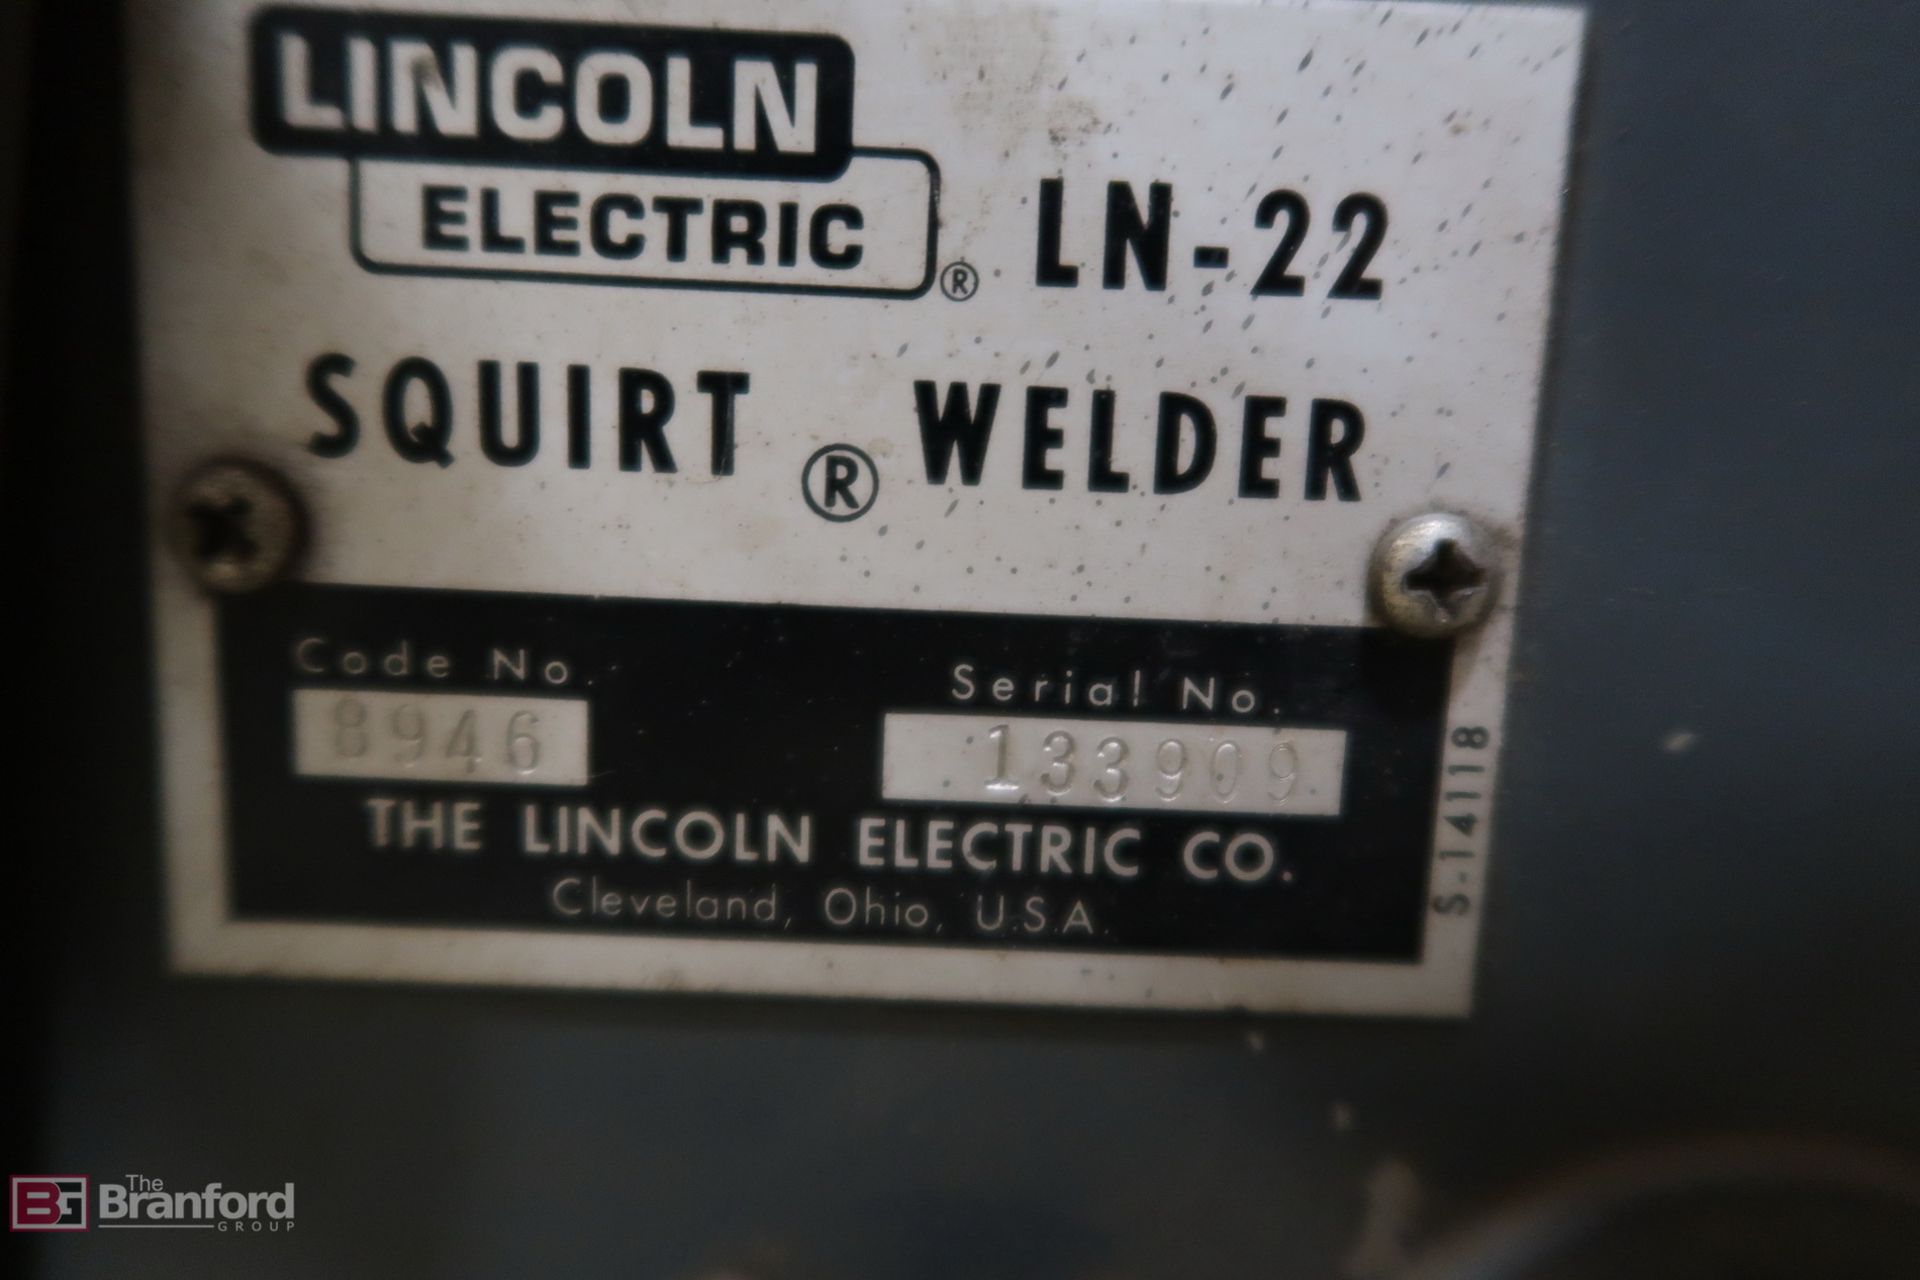 Lincoln LN-22 Electric Squirt Welder - Image 4 of 4